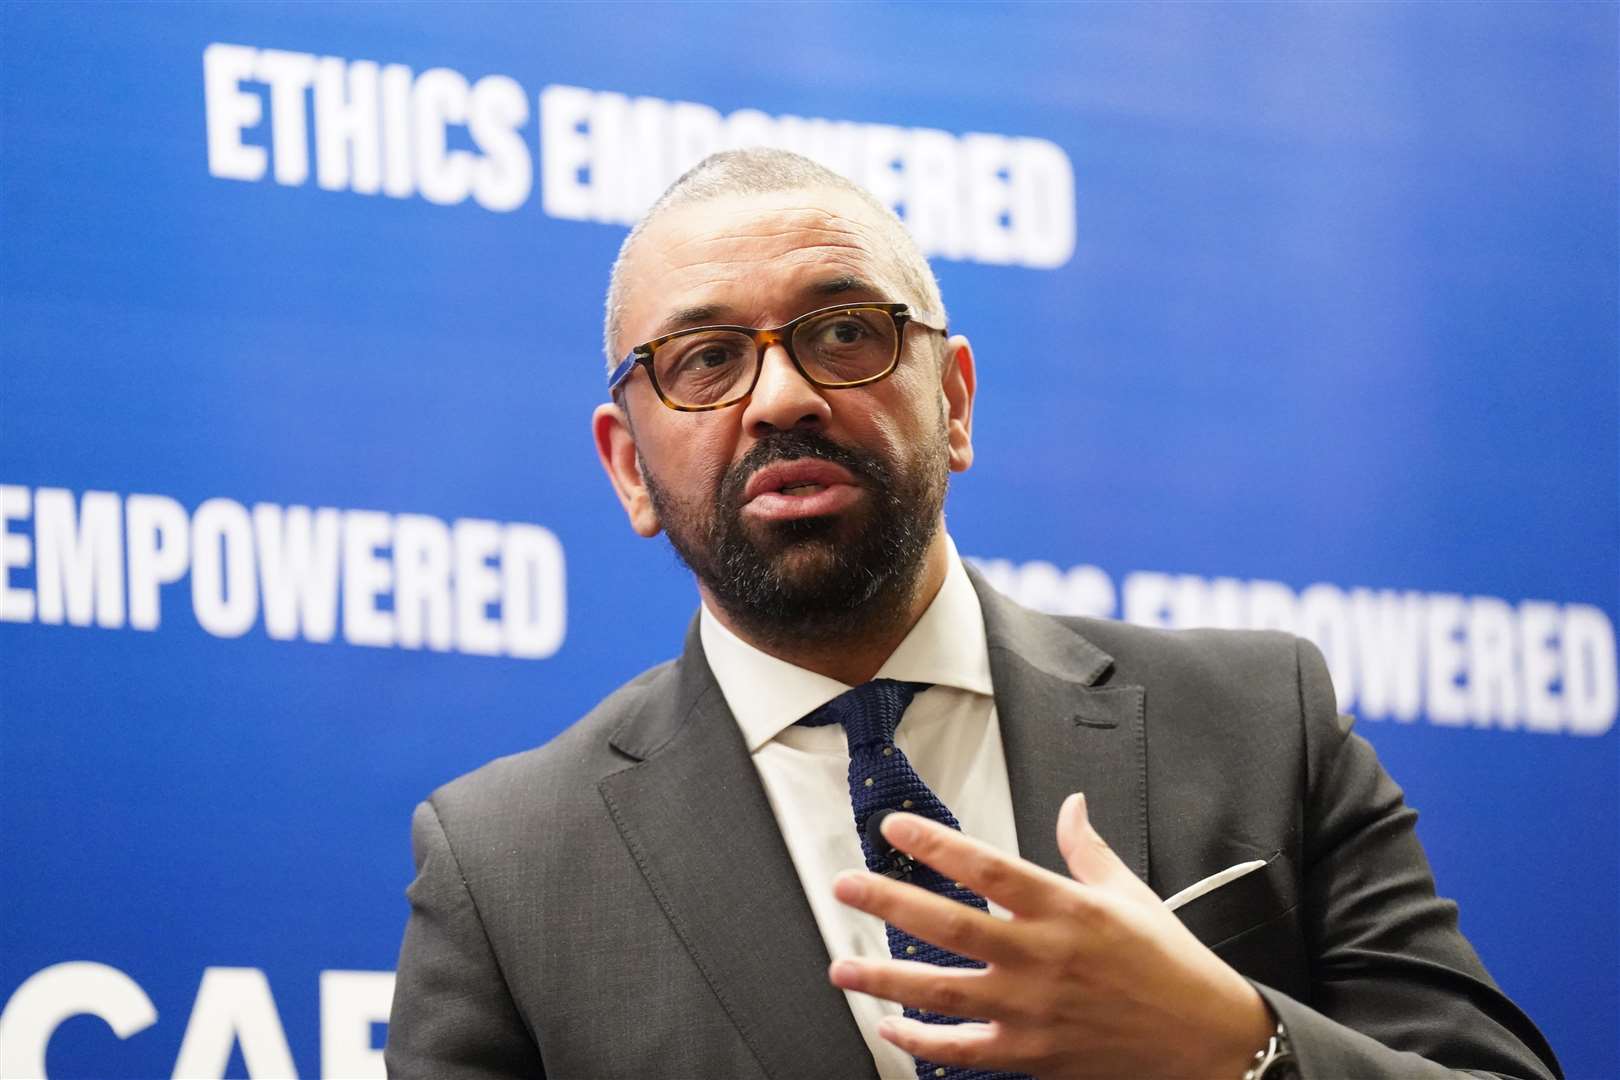 Home Secretary James Cleverly said MPs should not have to accept security threats as part of doing their job (Stefan Rousseau/PA)